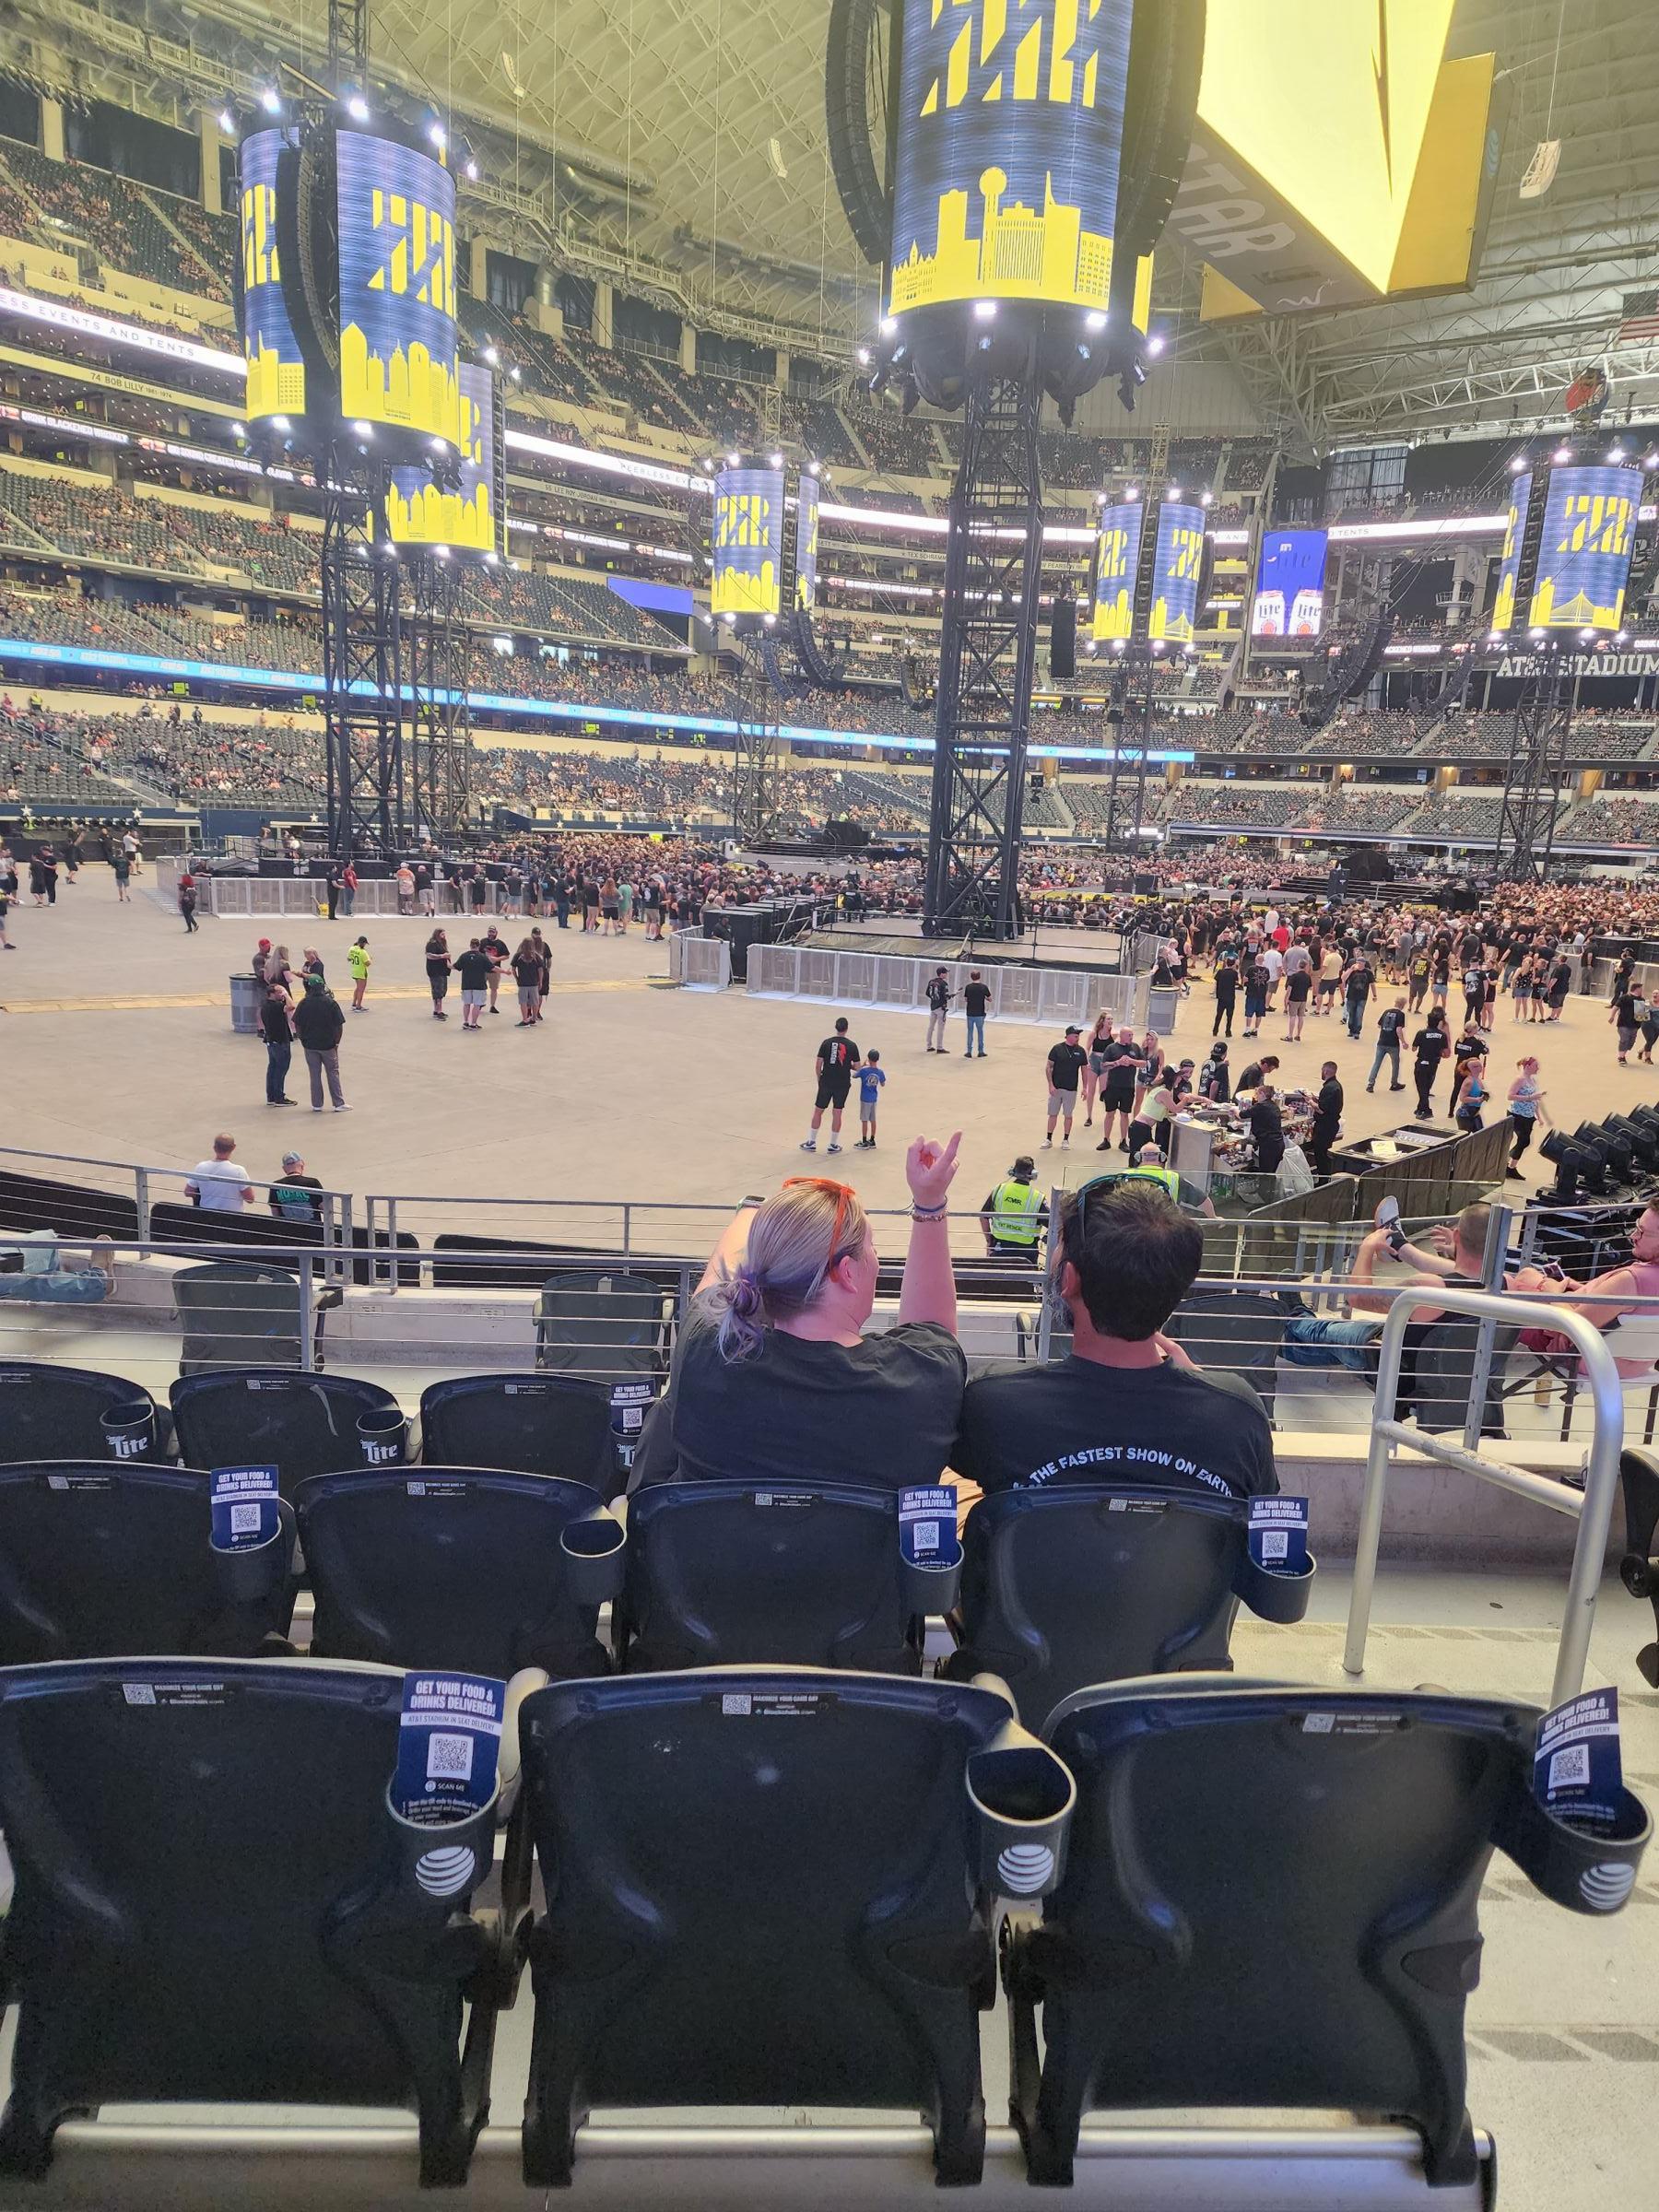 section 145, row 8 seat view  for concert - at&t stadium (cowboys stadium)